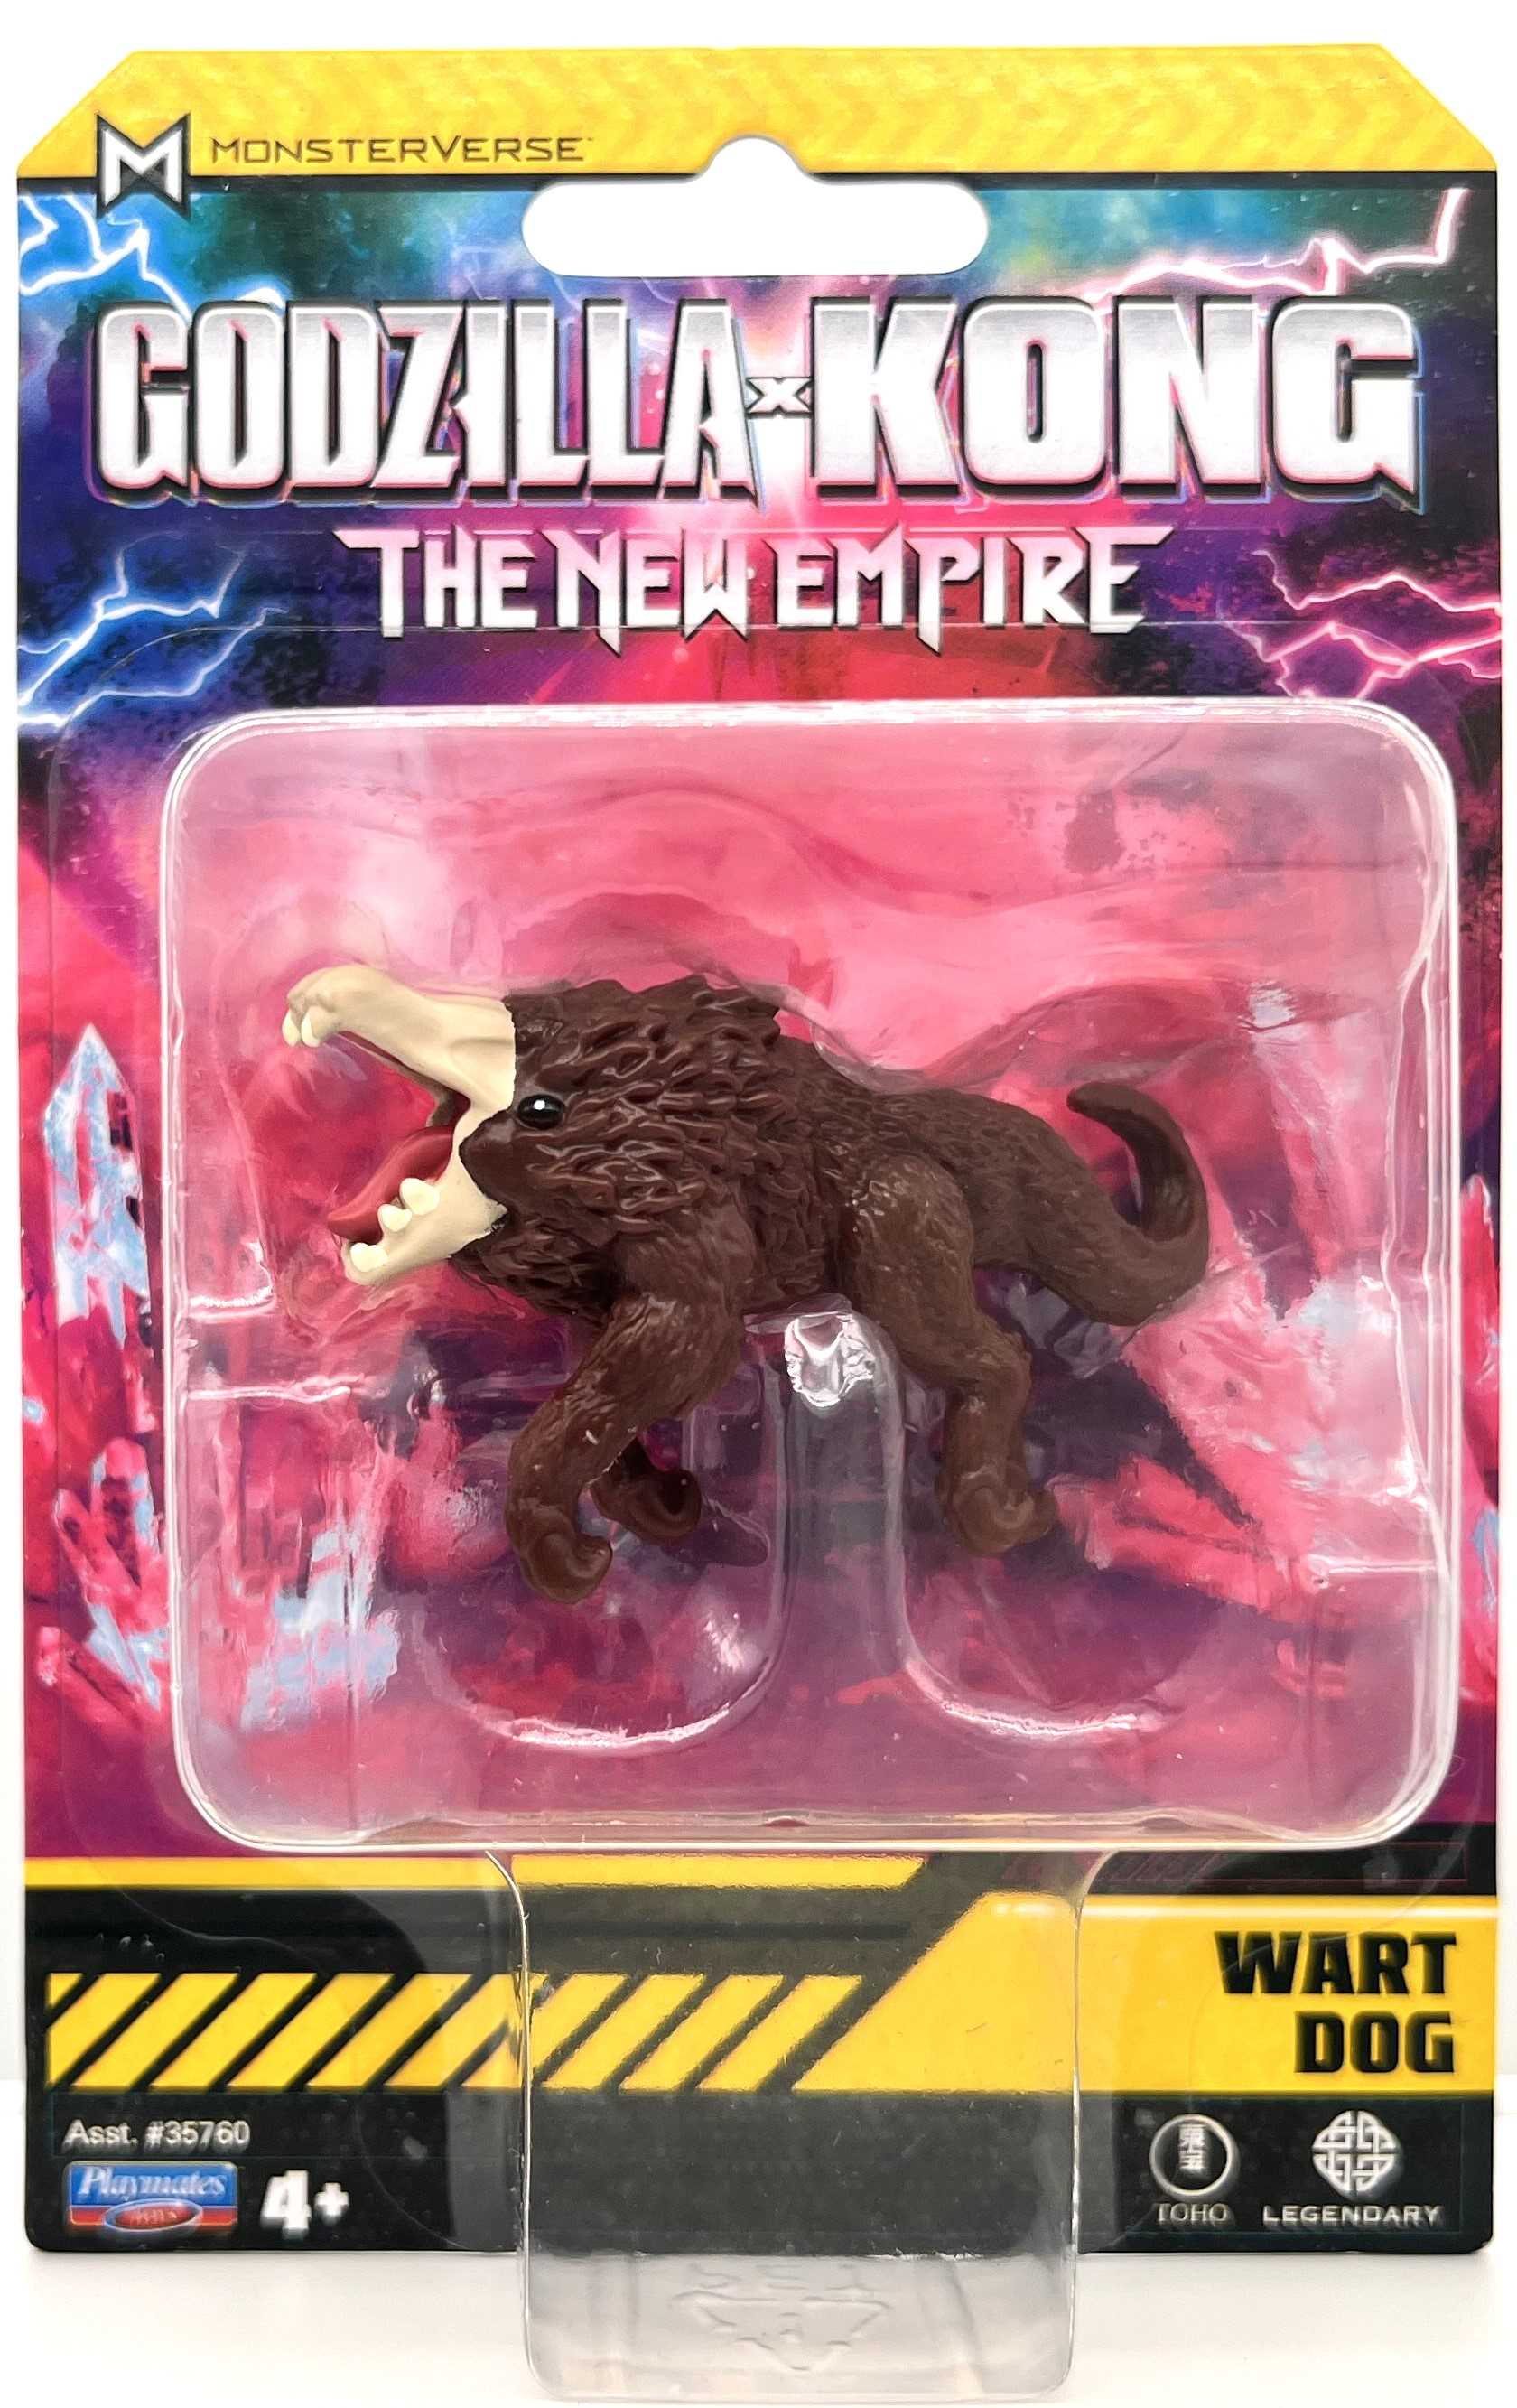 First looks at Godzilla X Kong The New Empire Toy Leak!